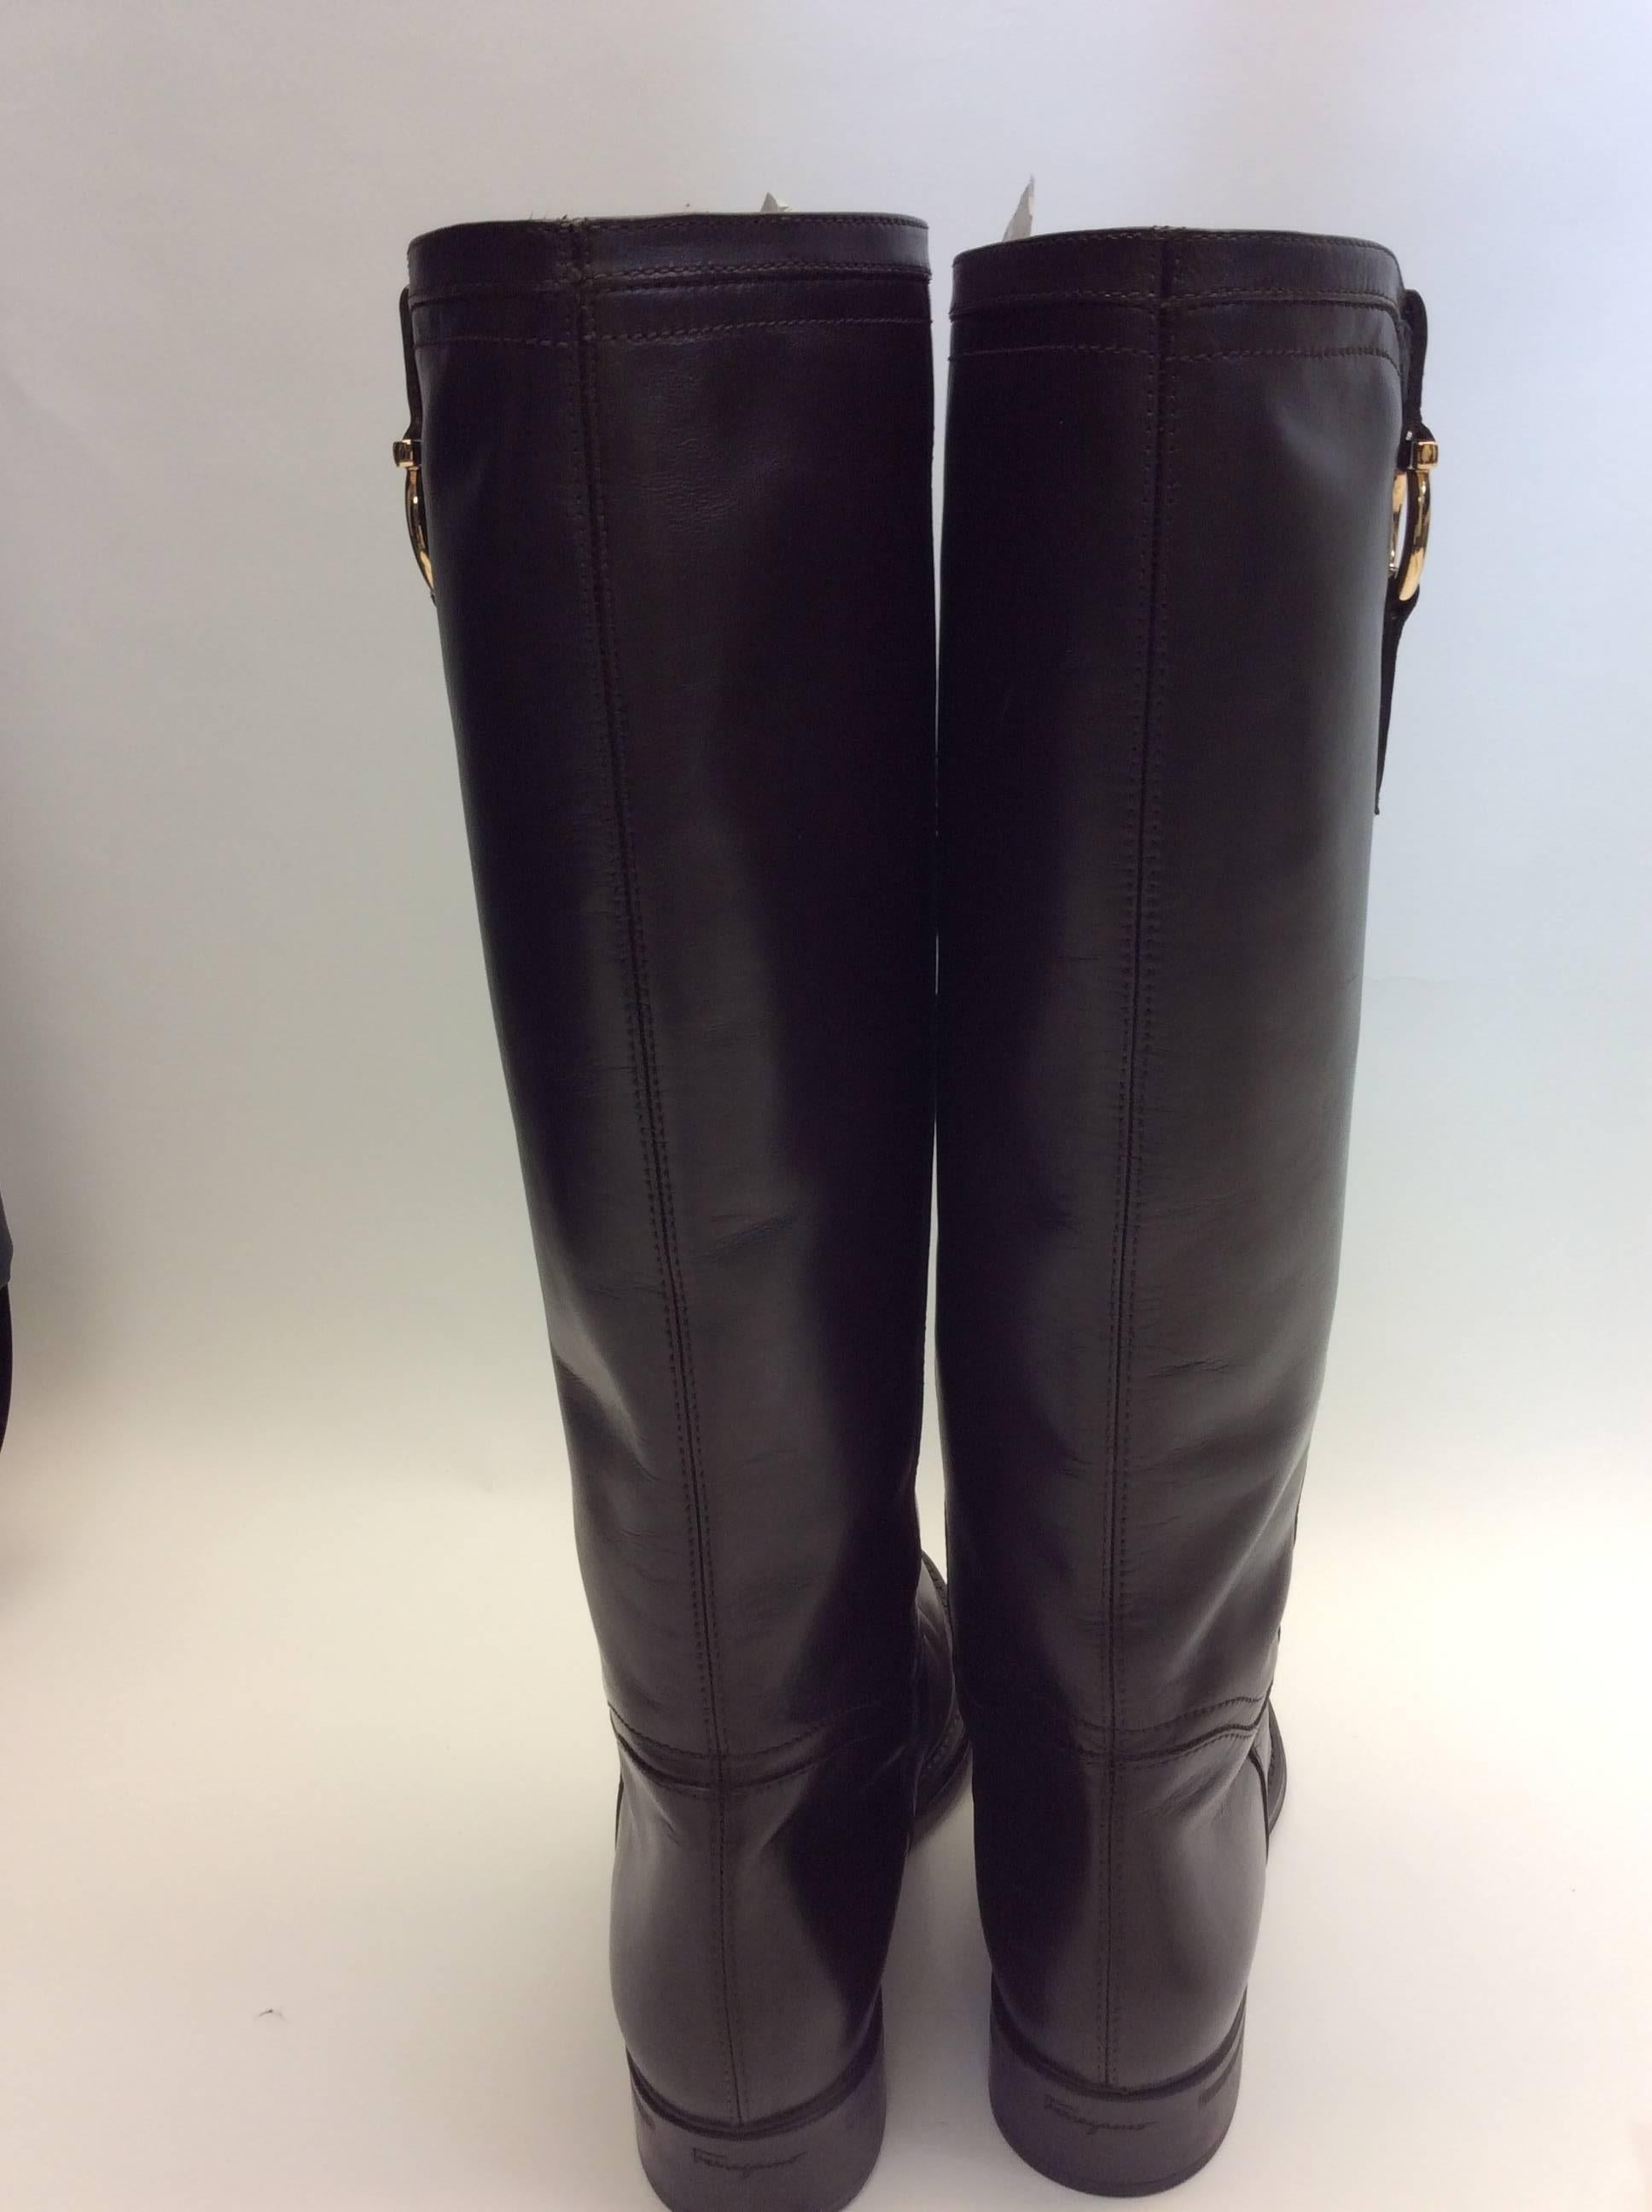 Salvatore Ferragamo Leather Riding Boot In Excellent Condition For Sale In Narberth, PA